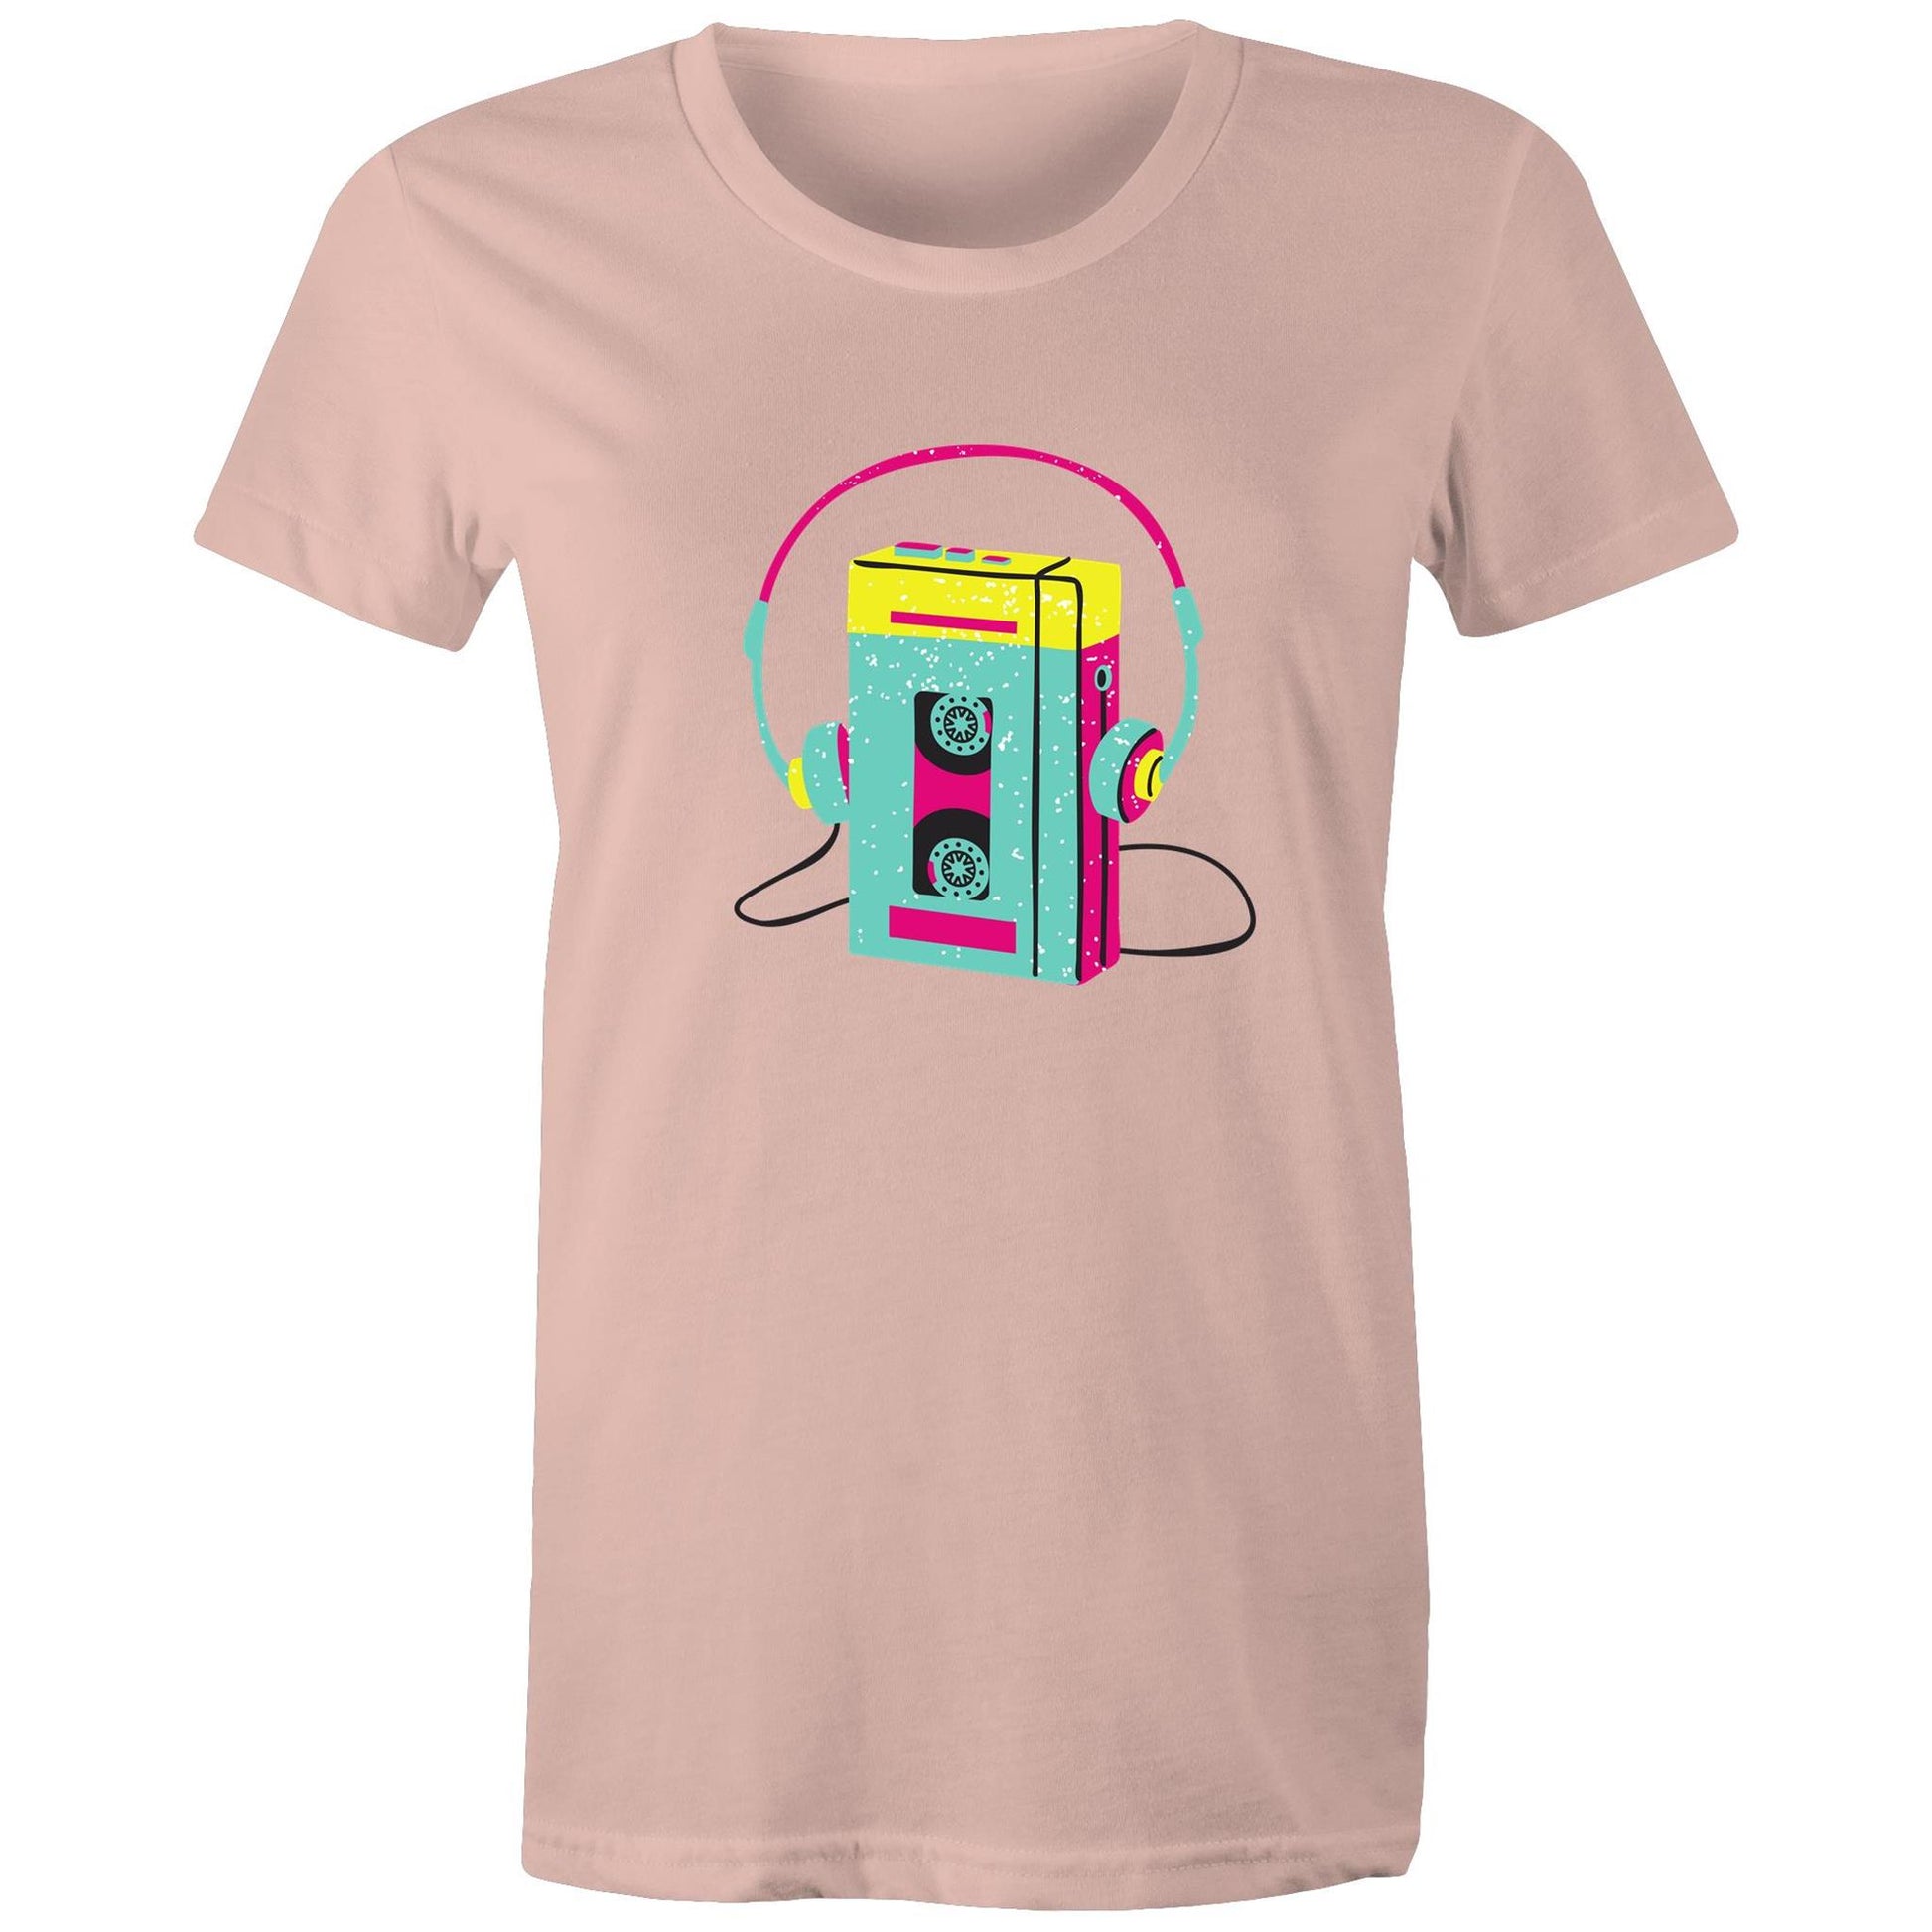 Wired For Sound, Music Player - Womens T-shirt Pale Pink Womens T-shirt Music Retro Womens